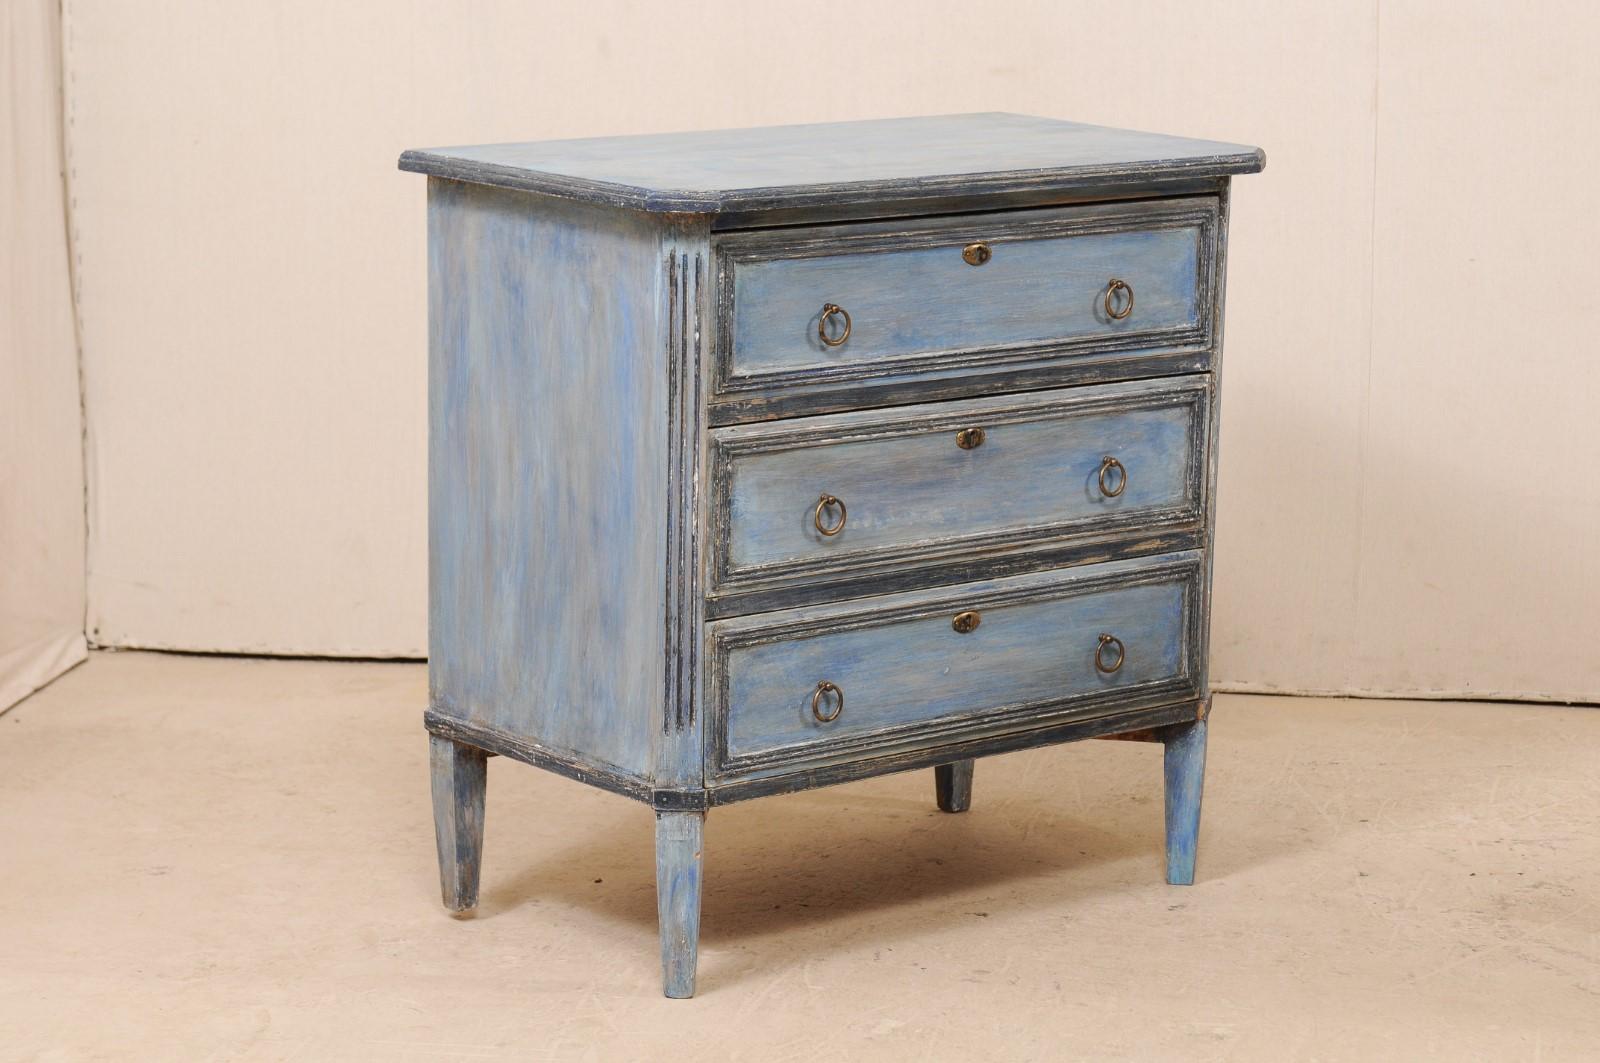 Carved Pair of Swedish Midcentury Painted Wood Three-Drawer Chests in Soft Blue Finish